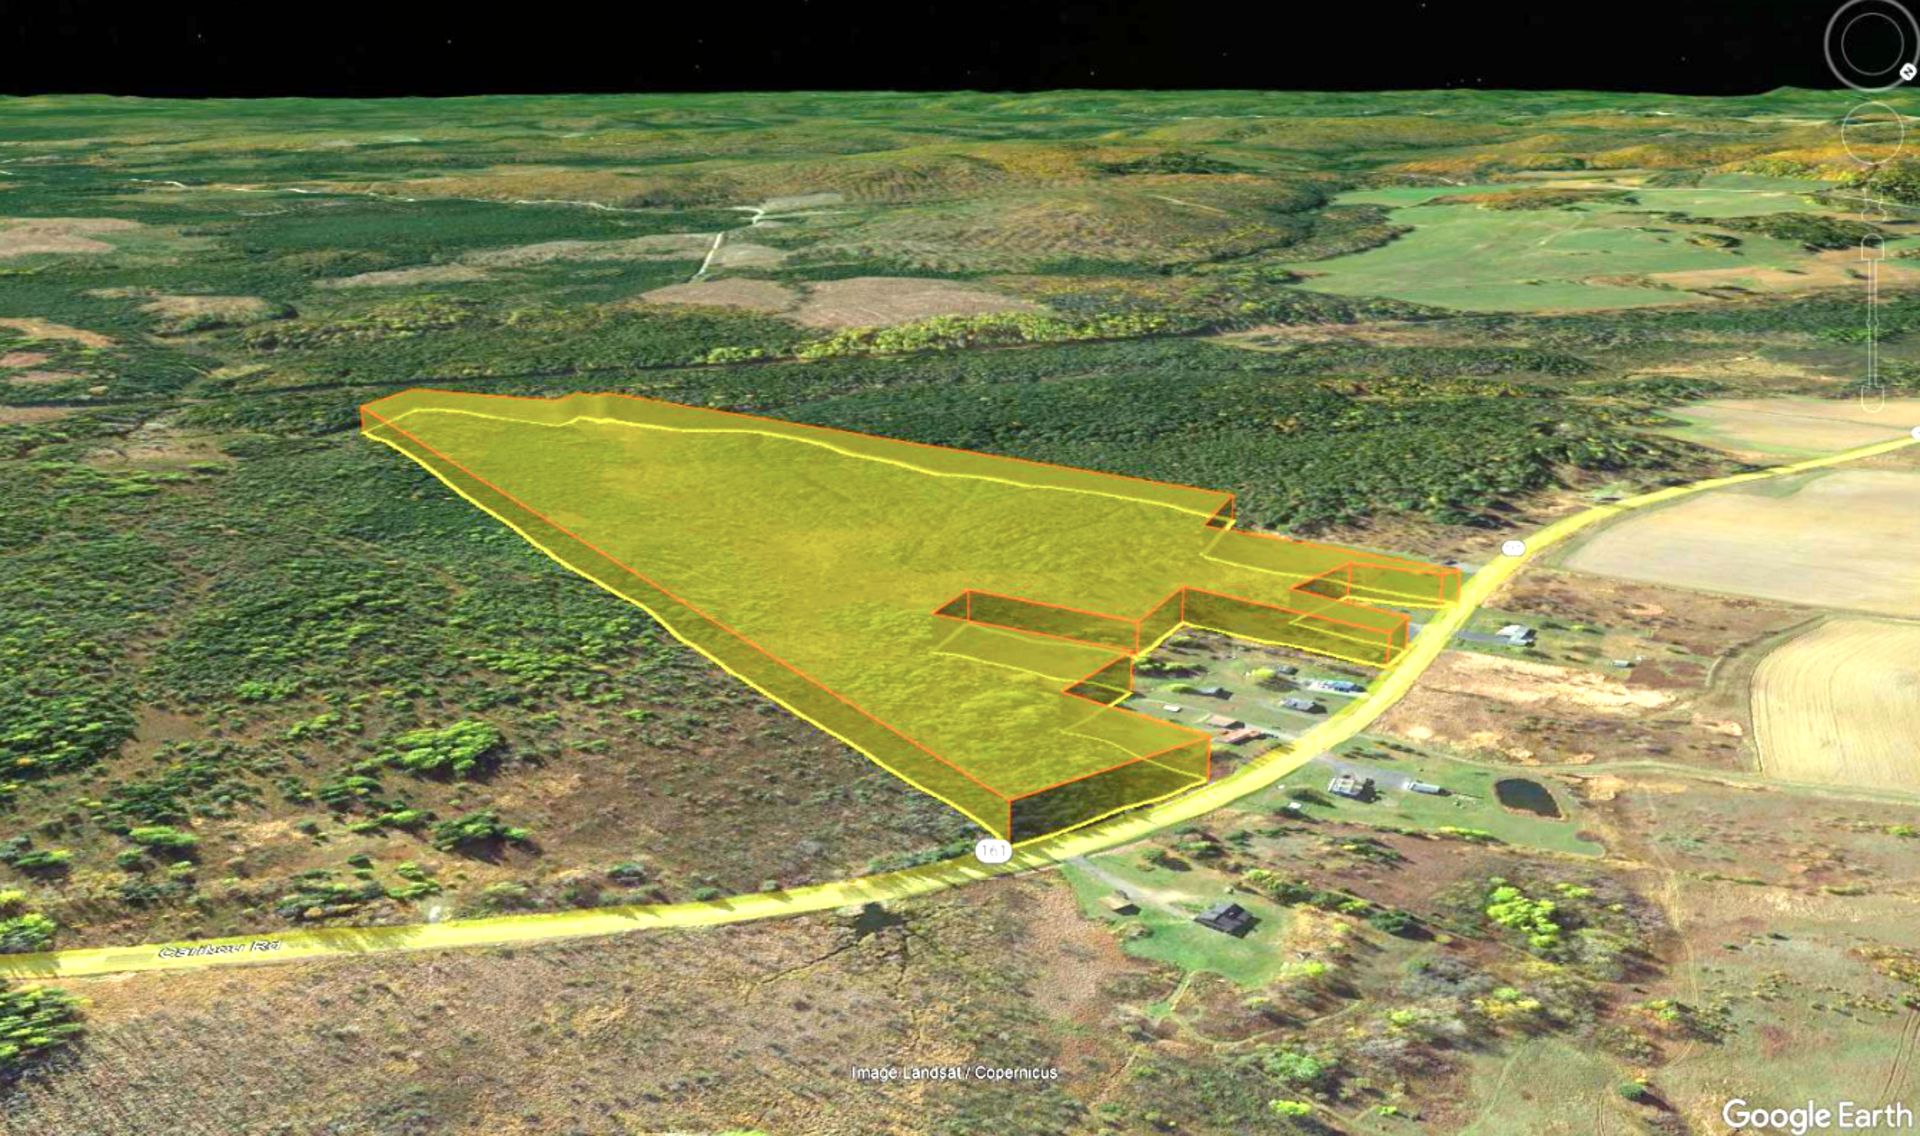 56 Buildable Acres on Route 161 in Aroostook County, Maine! - Image 3 of 11